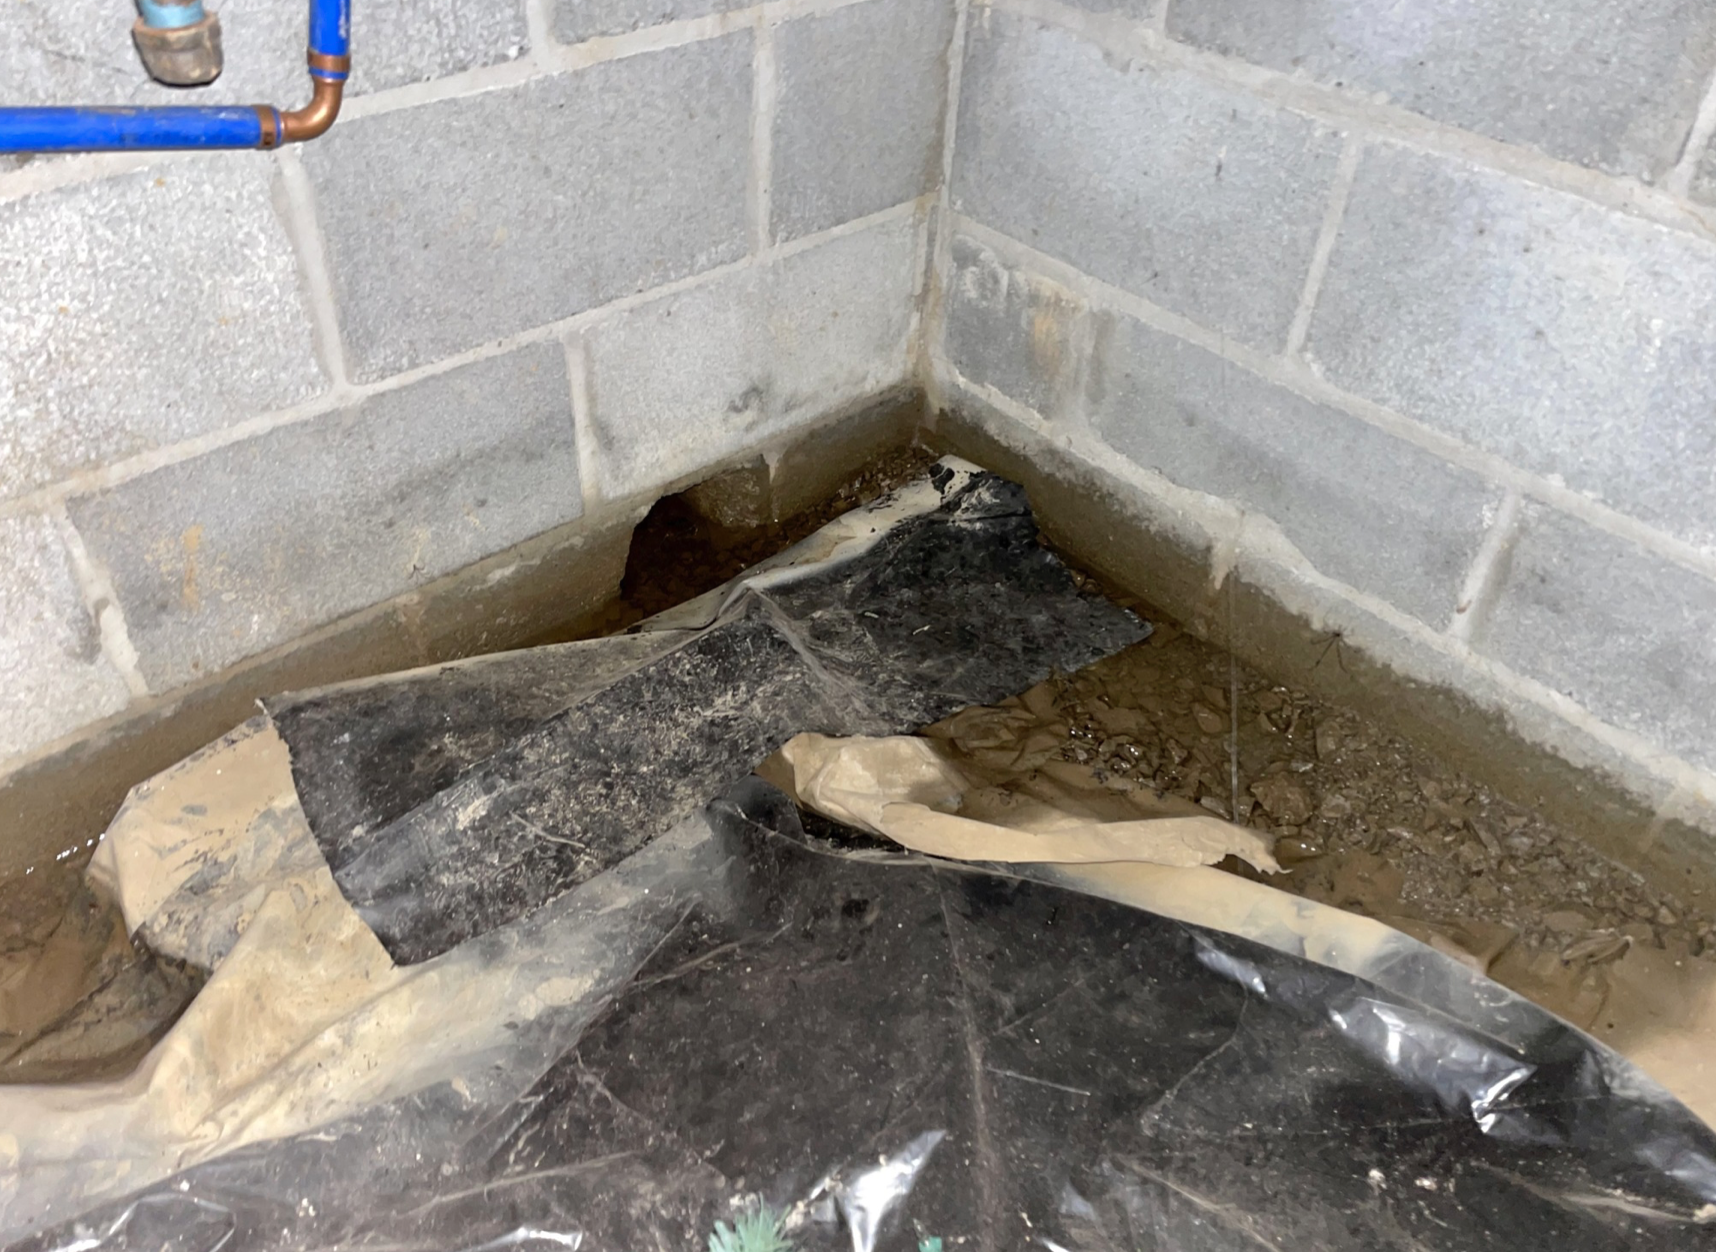 Water intrusion in the crawlspace